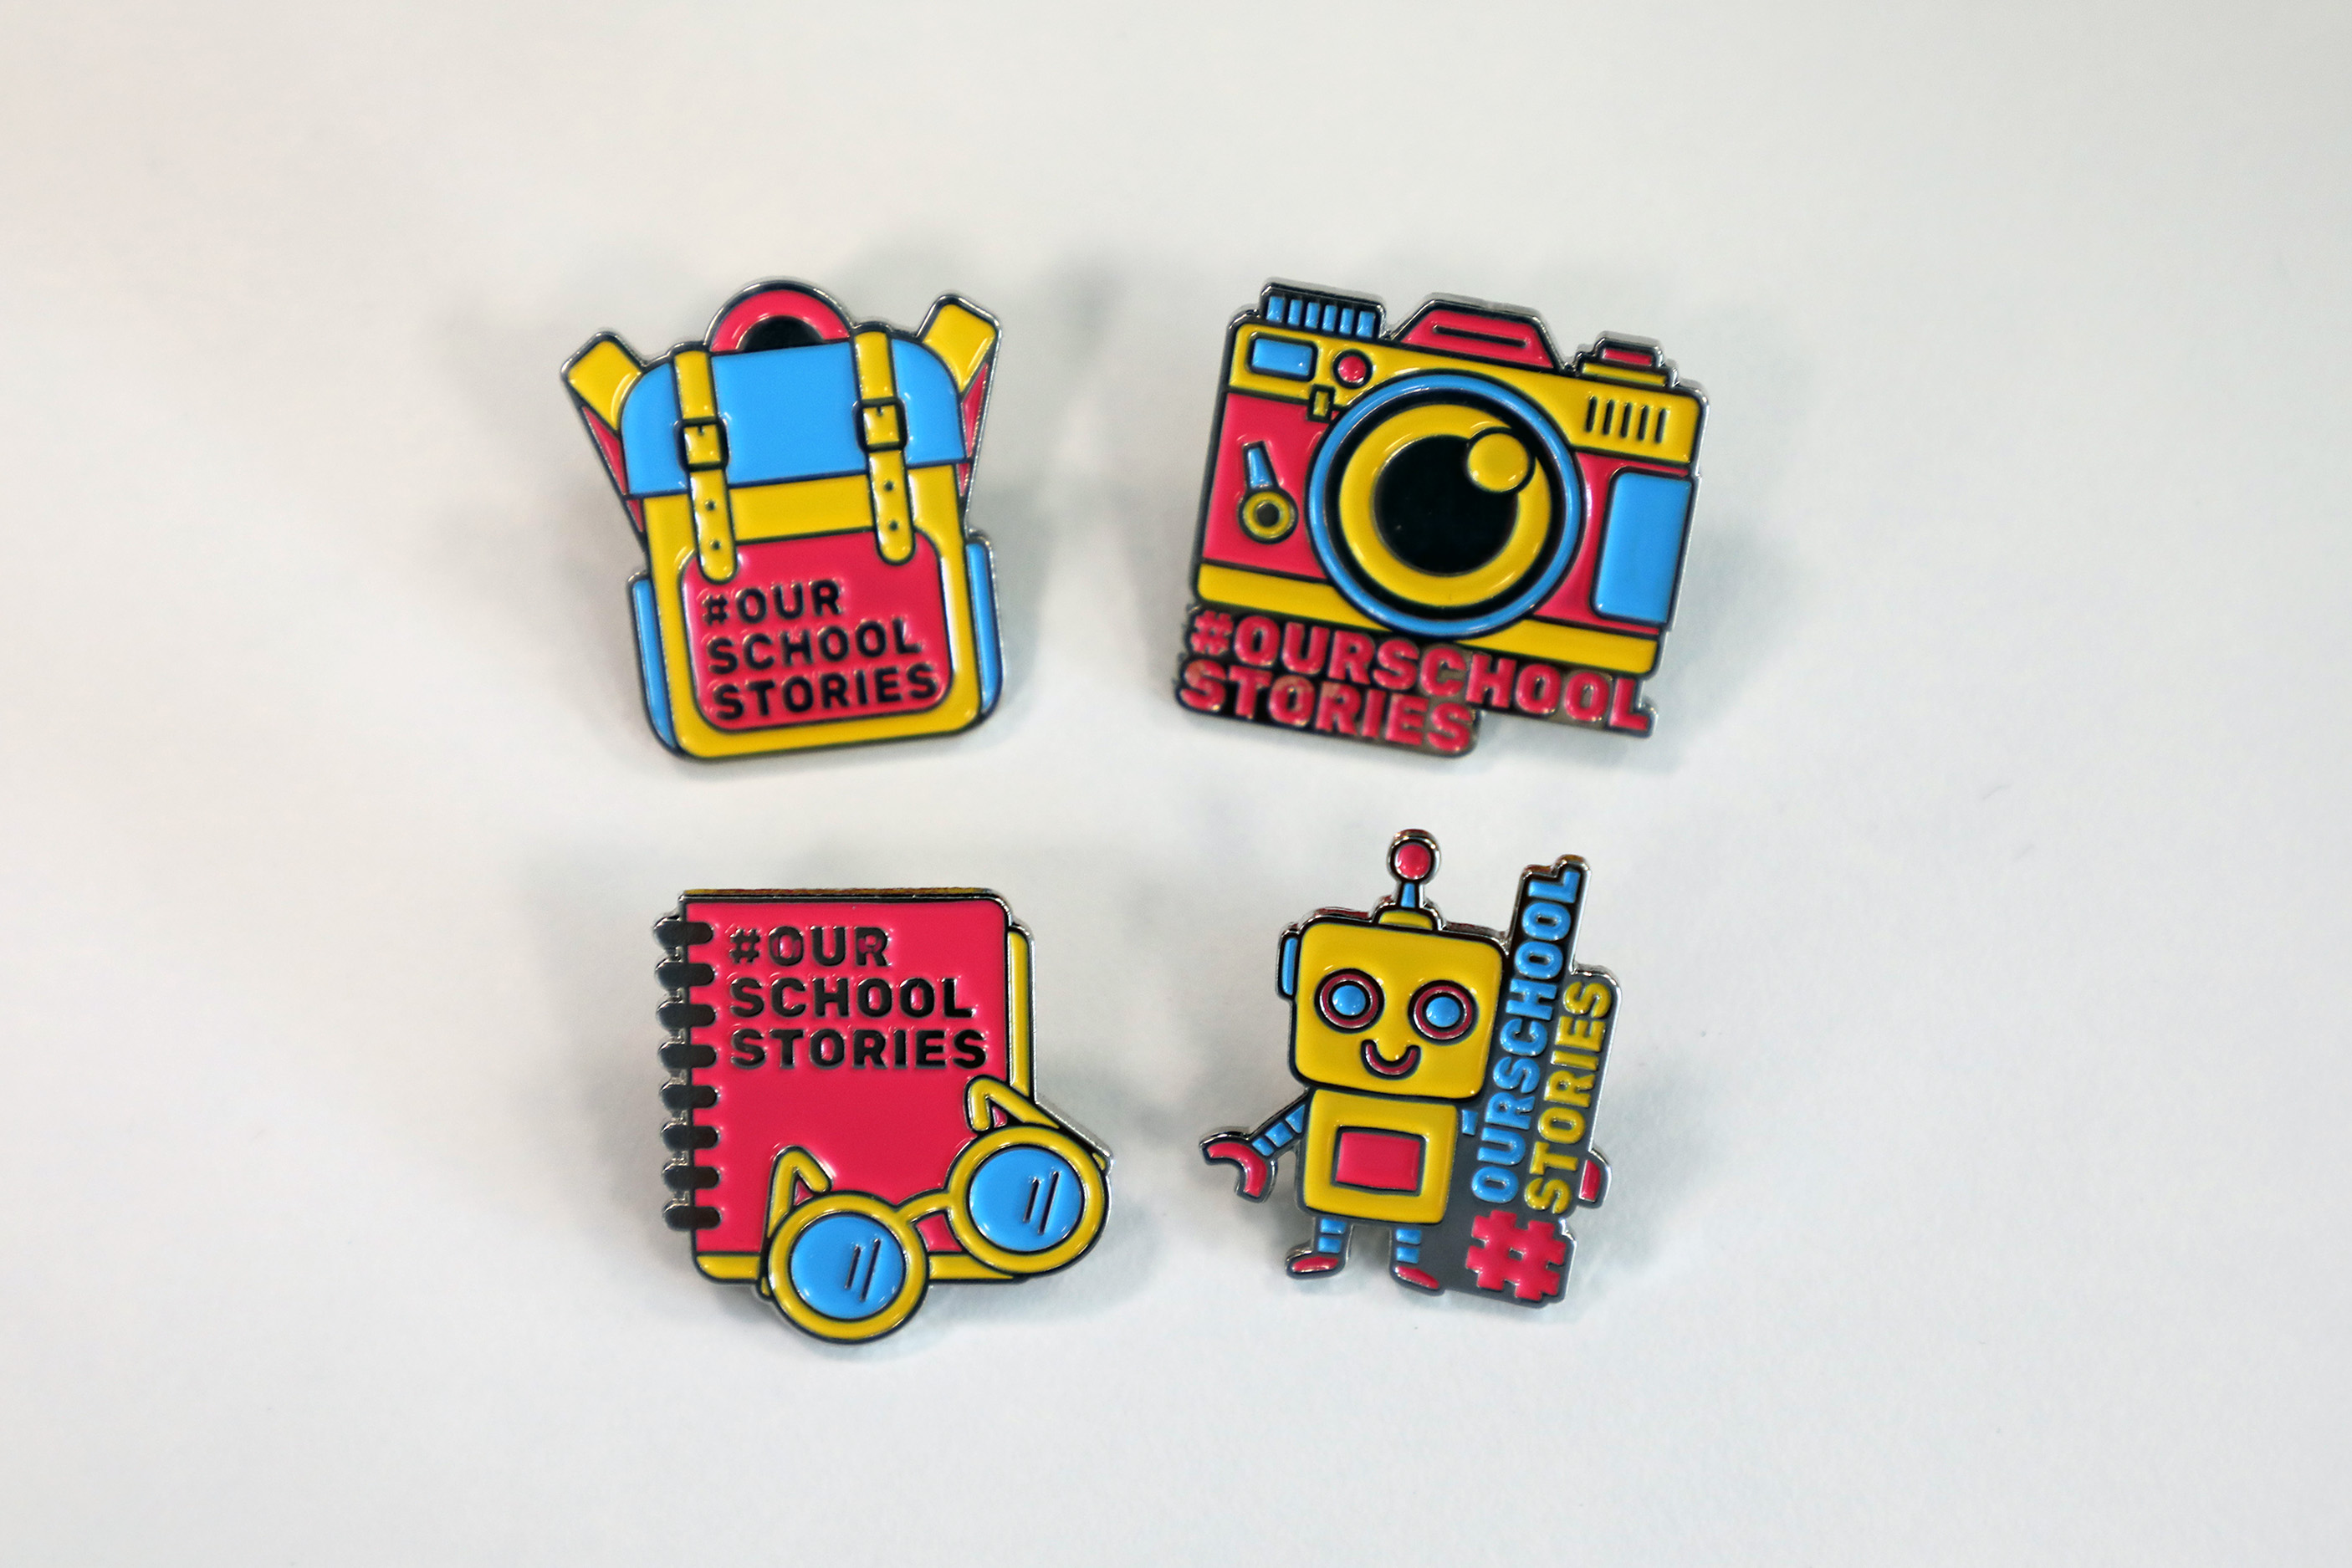 OSOS 2021 limited-edition pins